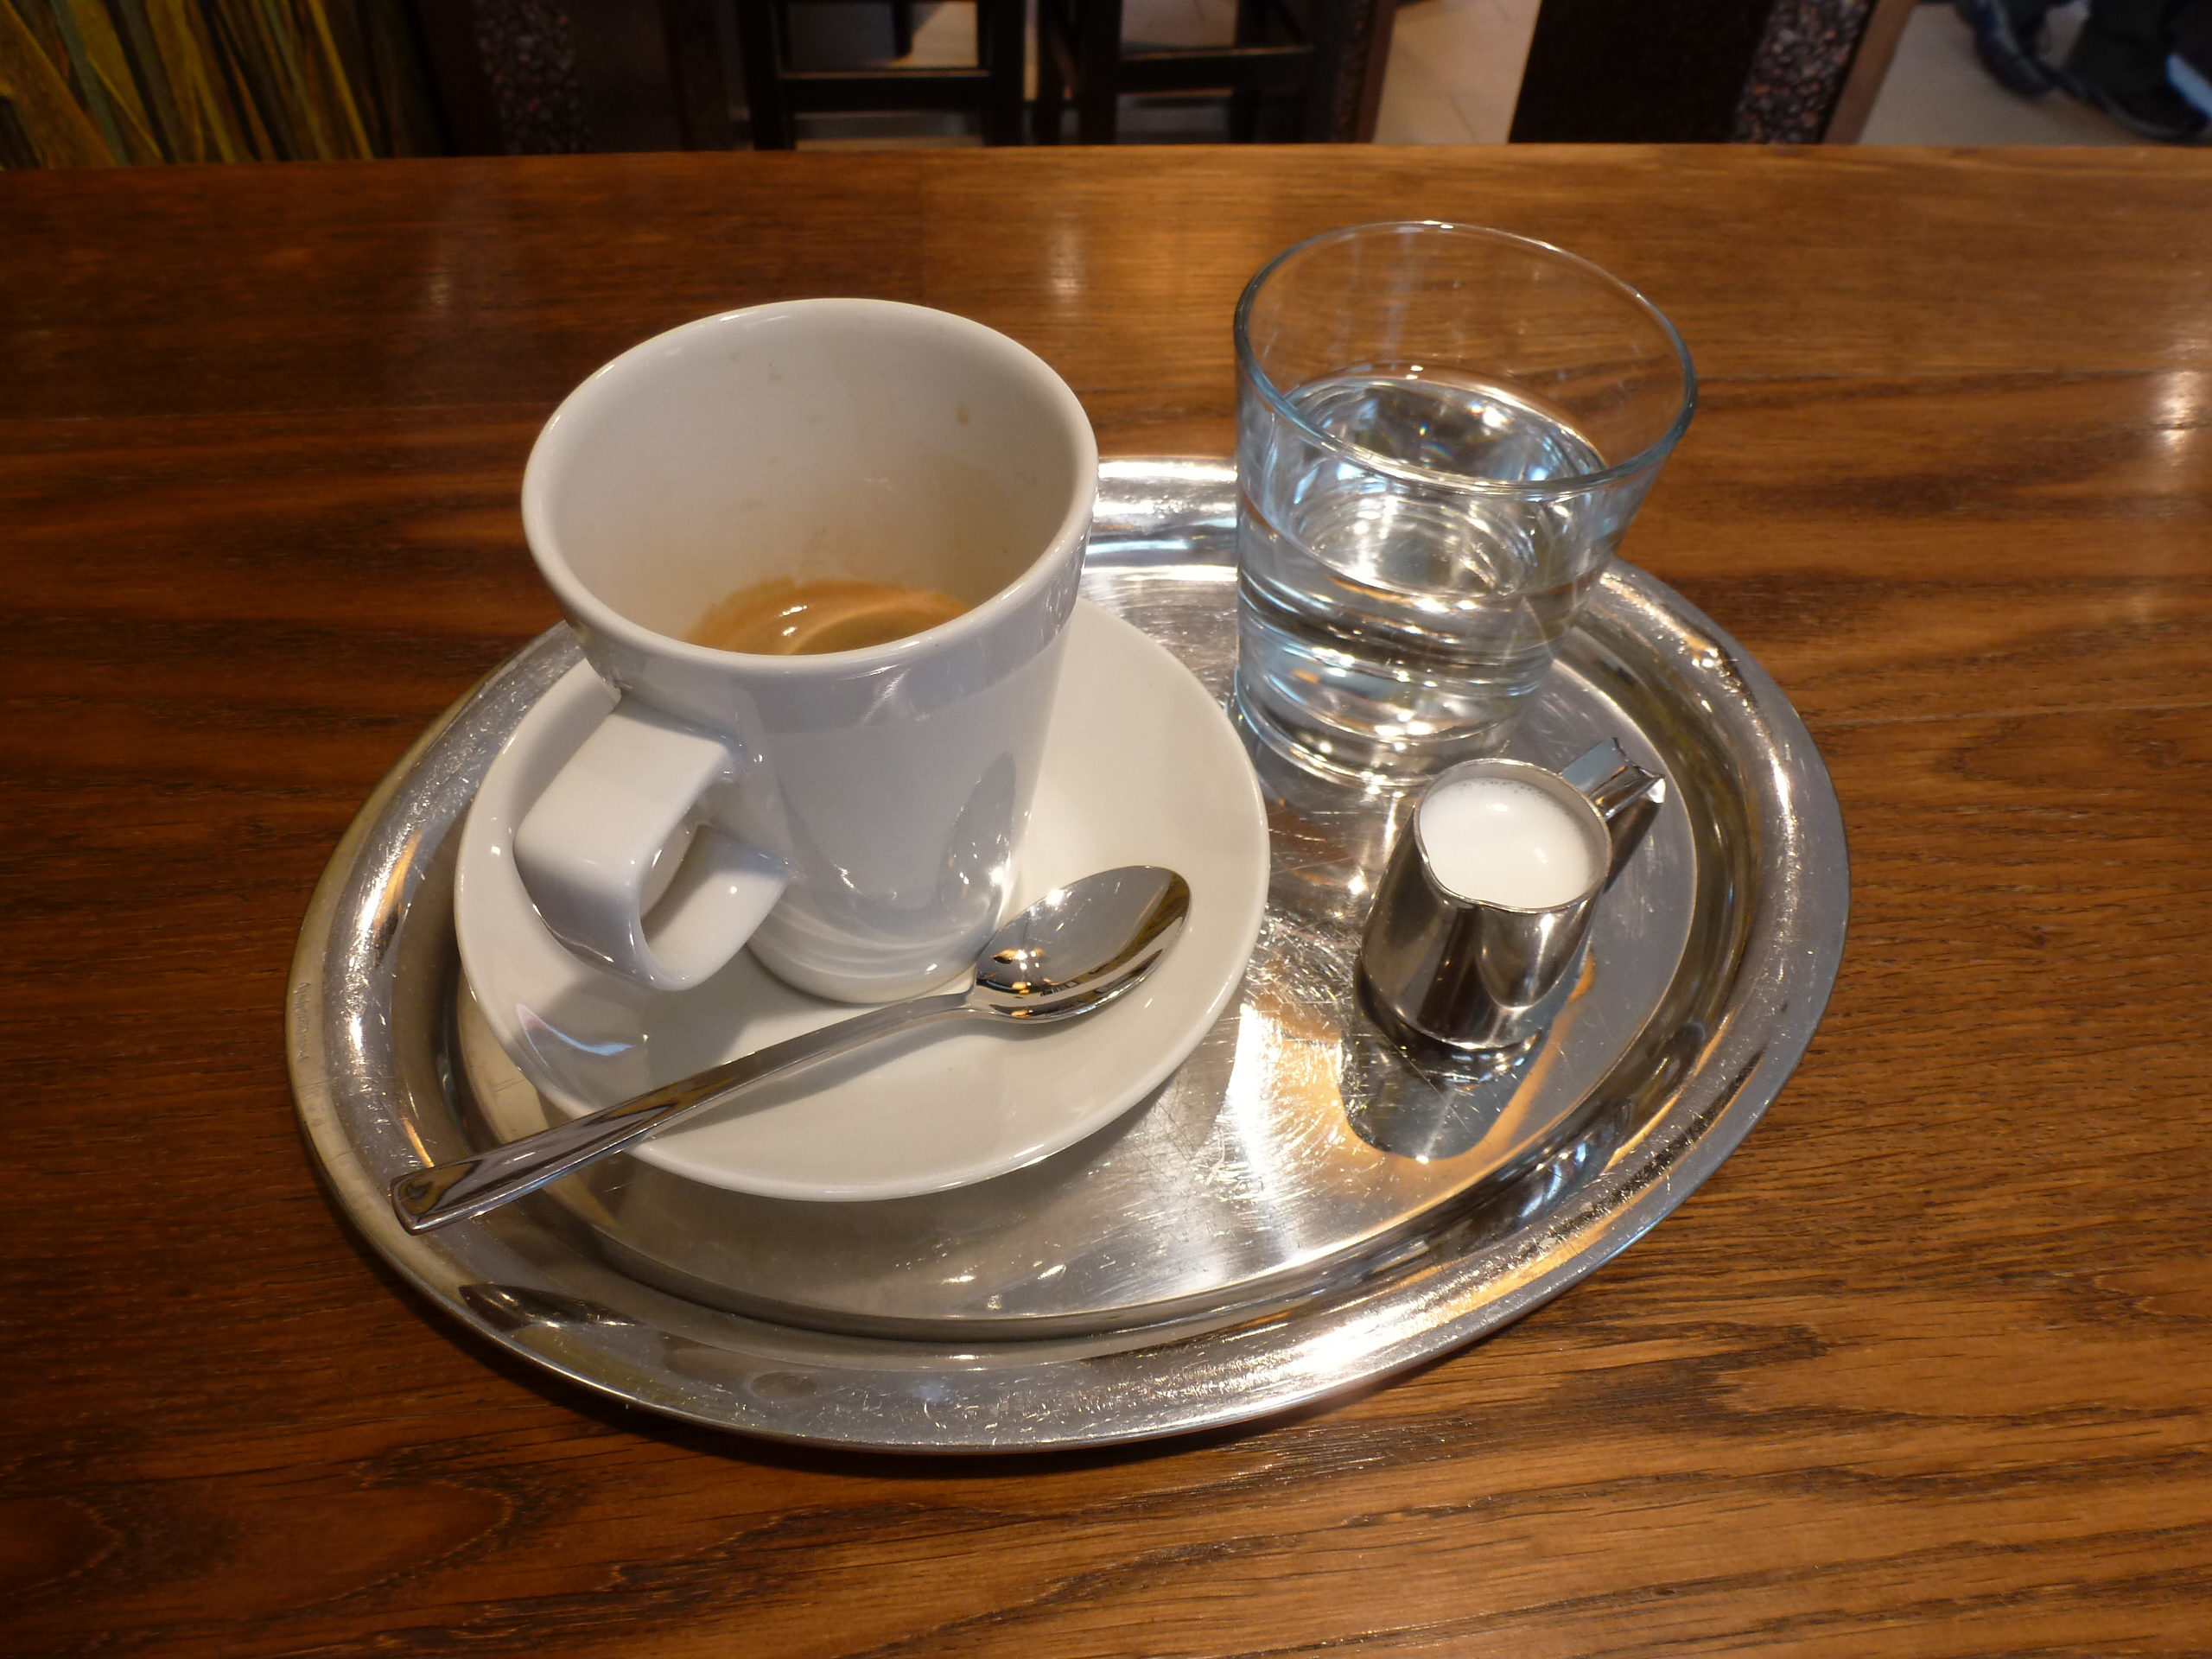 Traditional Viennese coffee service: silver tray, water, milk, and sometimes chocolate